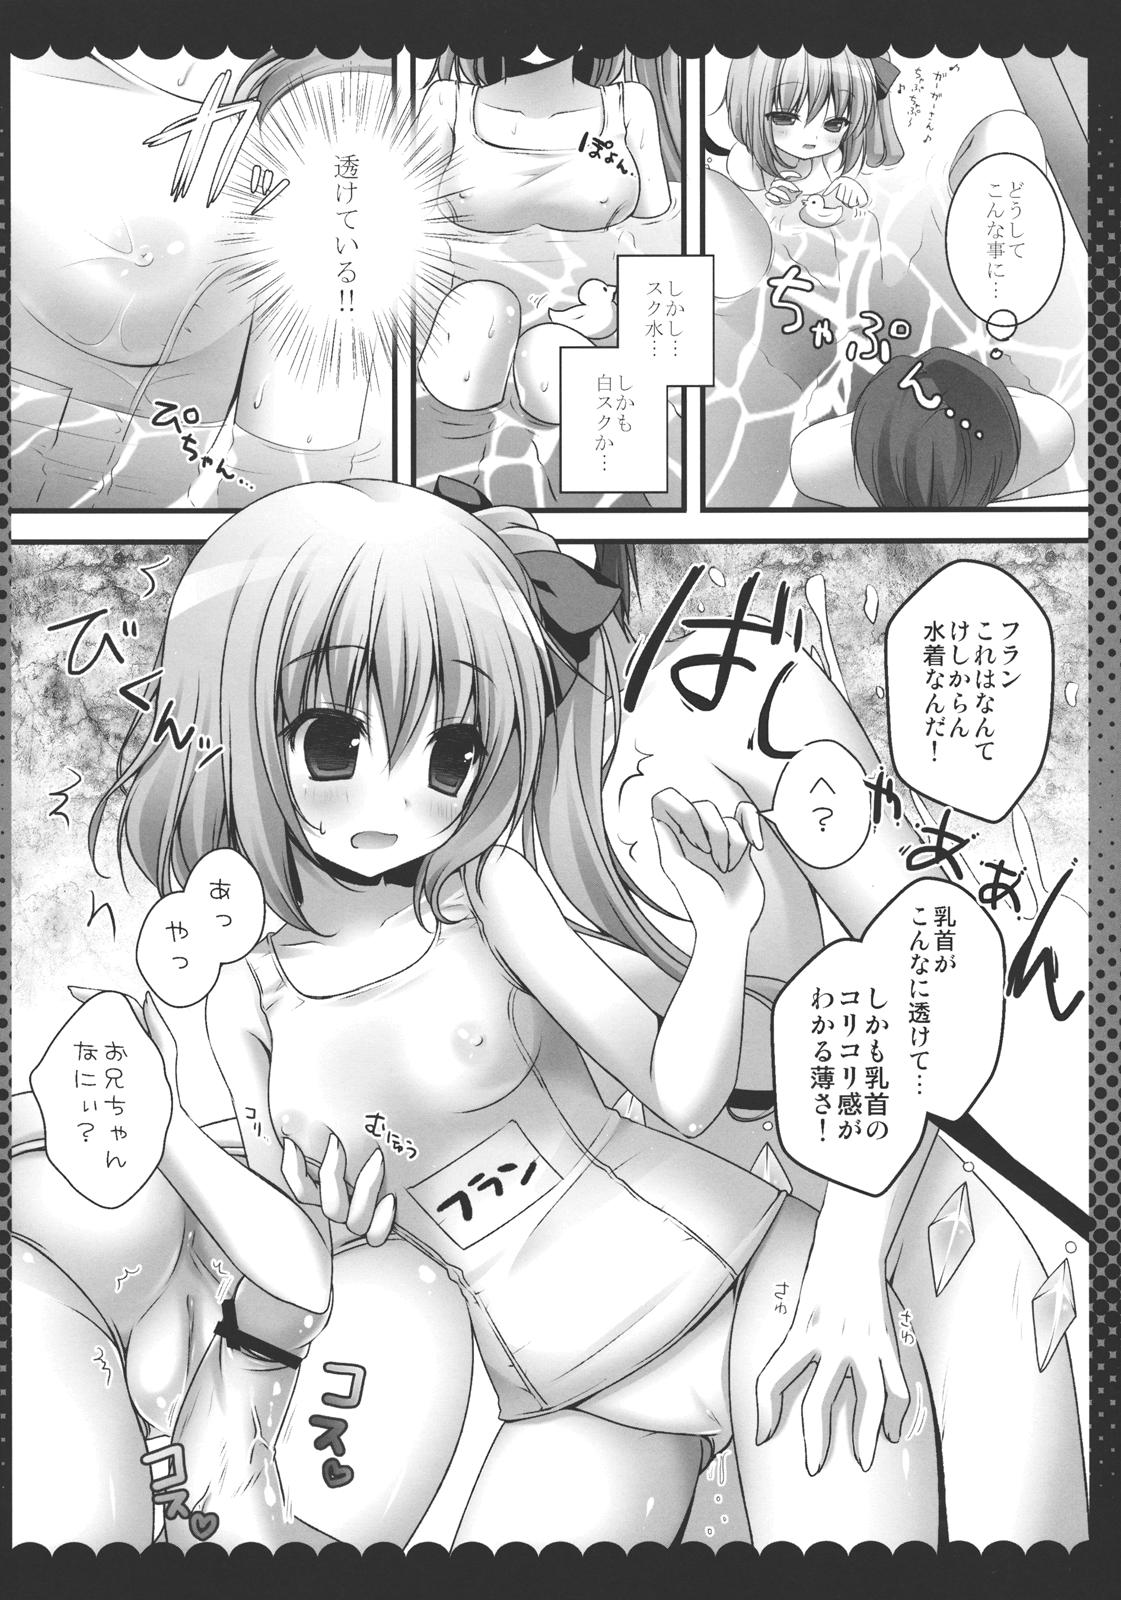 Brunettes Oniichan, Kore Suki? - Touhou project Cowgirl - Page 7